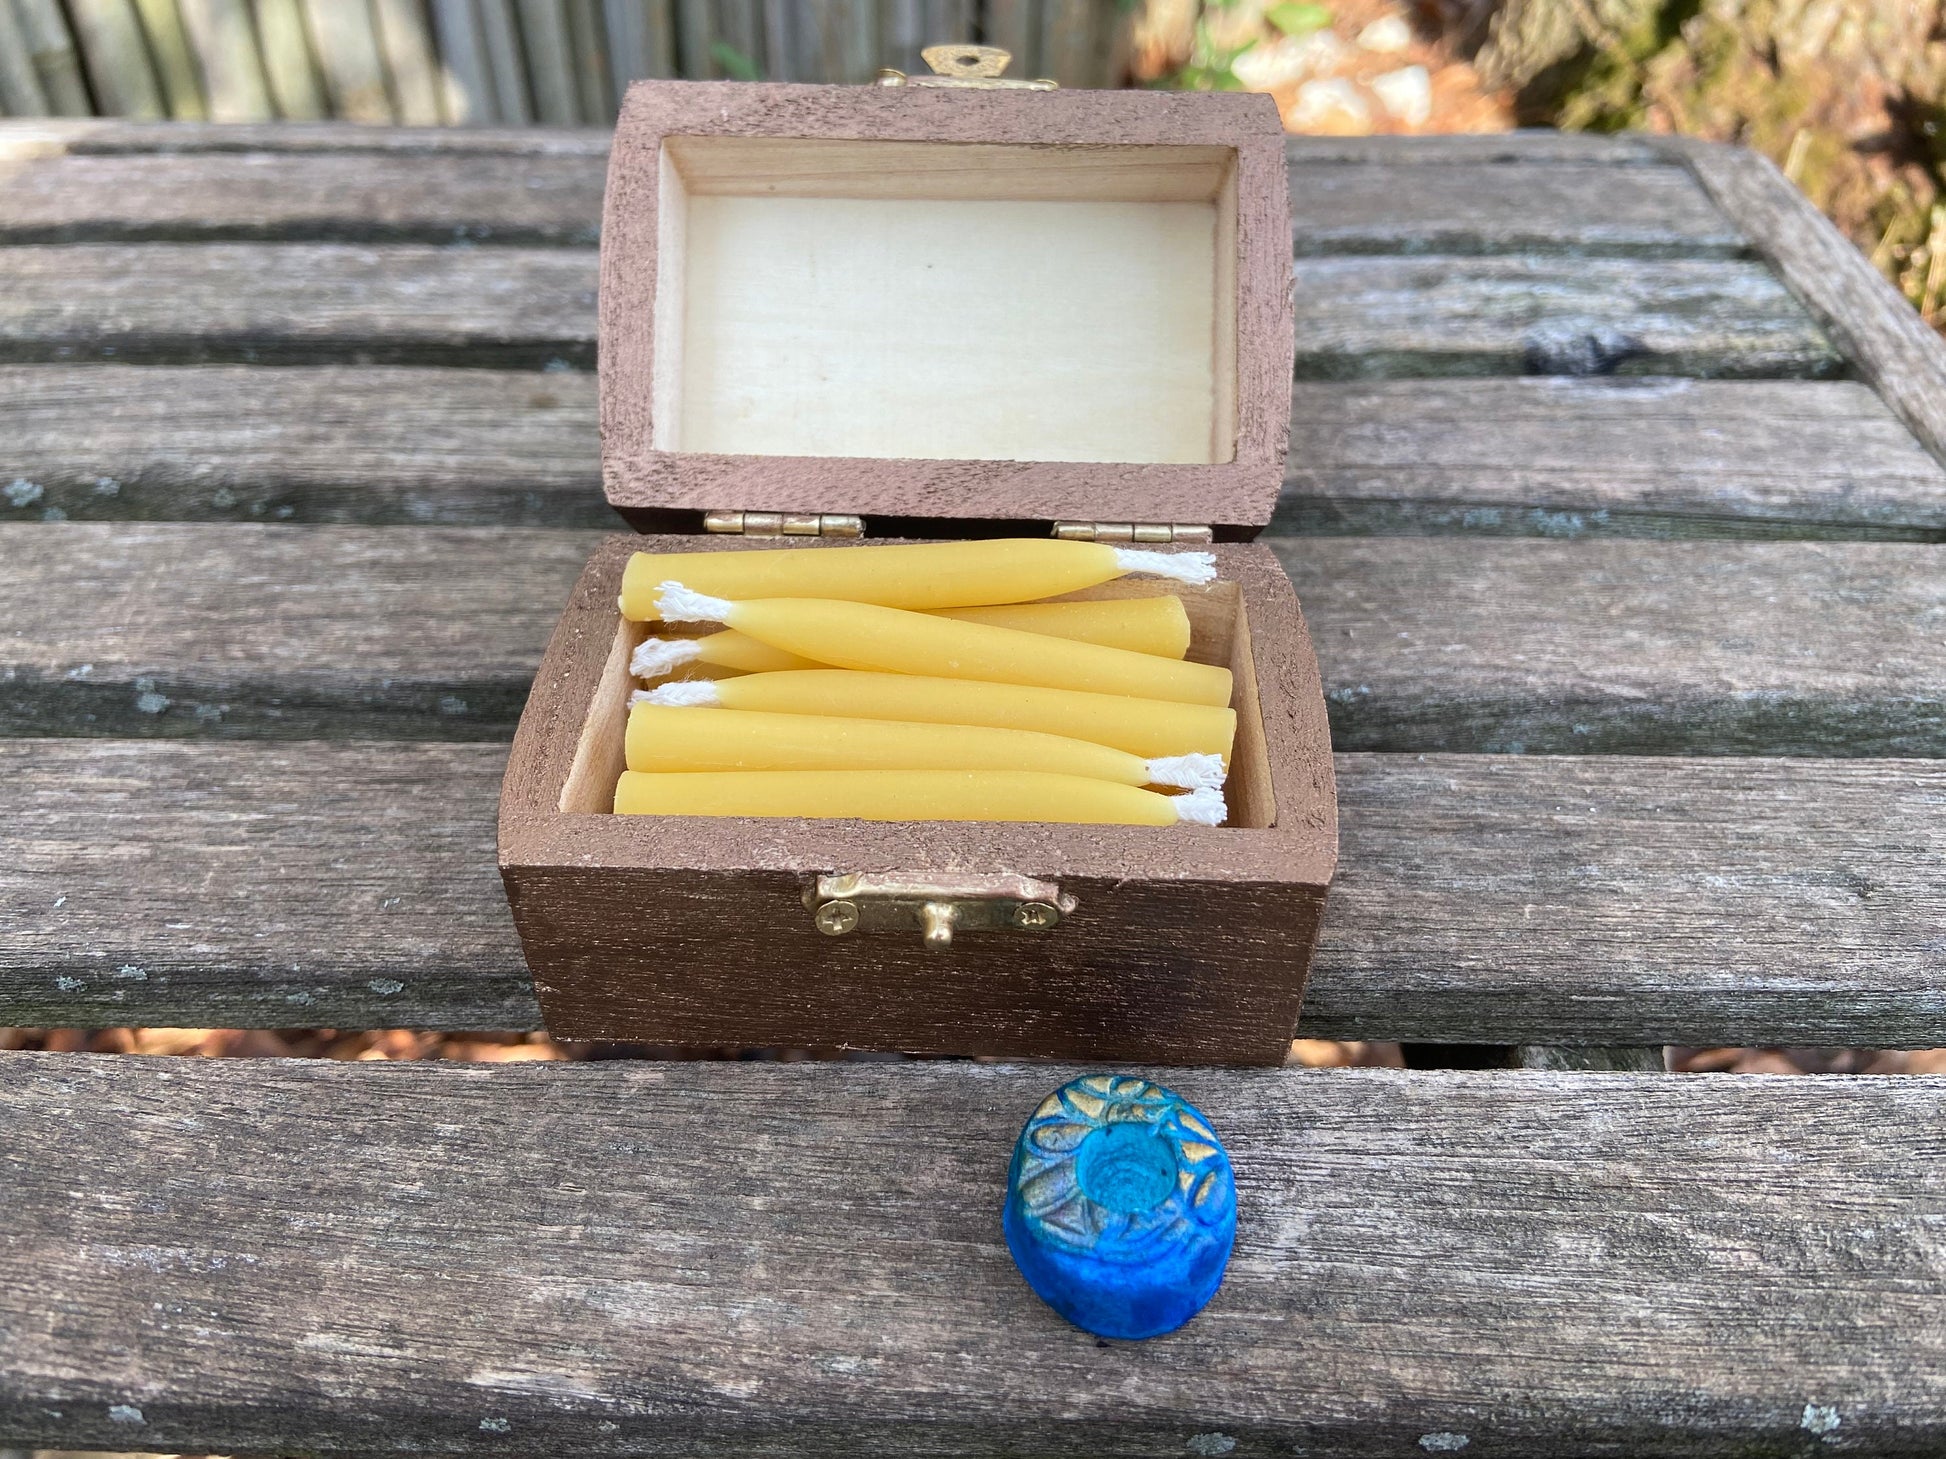 100% Pure Beeswax Candles- 20 Minute Meditation-20 Candle Set-Wooden Box-Owl-Mindful-Ritual-Alter-Intention-Spell-Kit